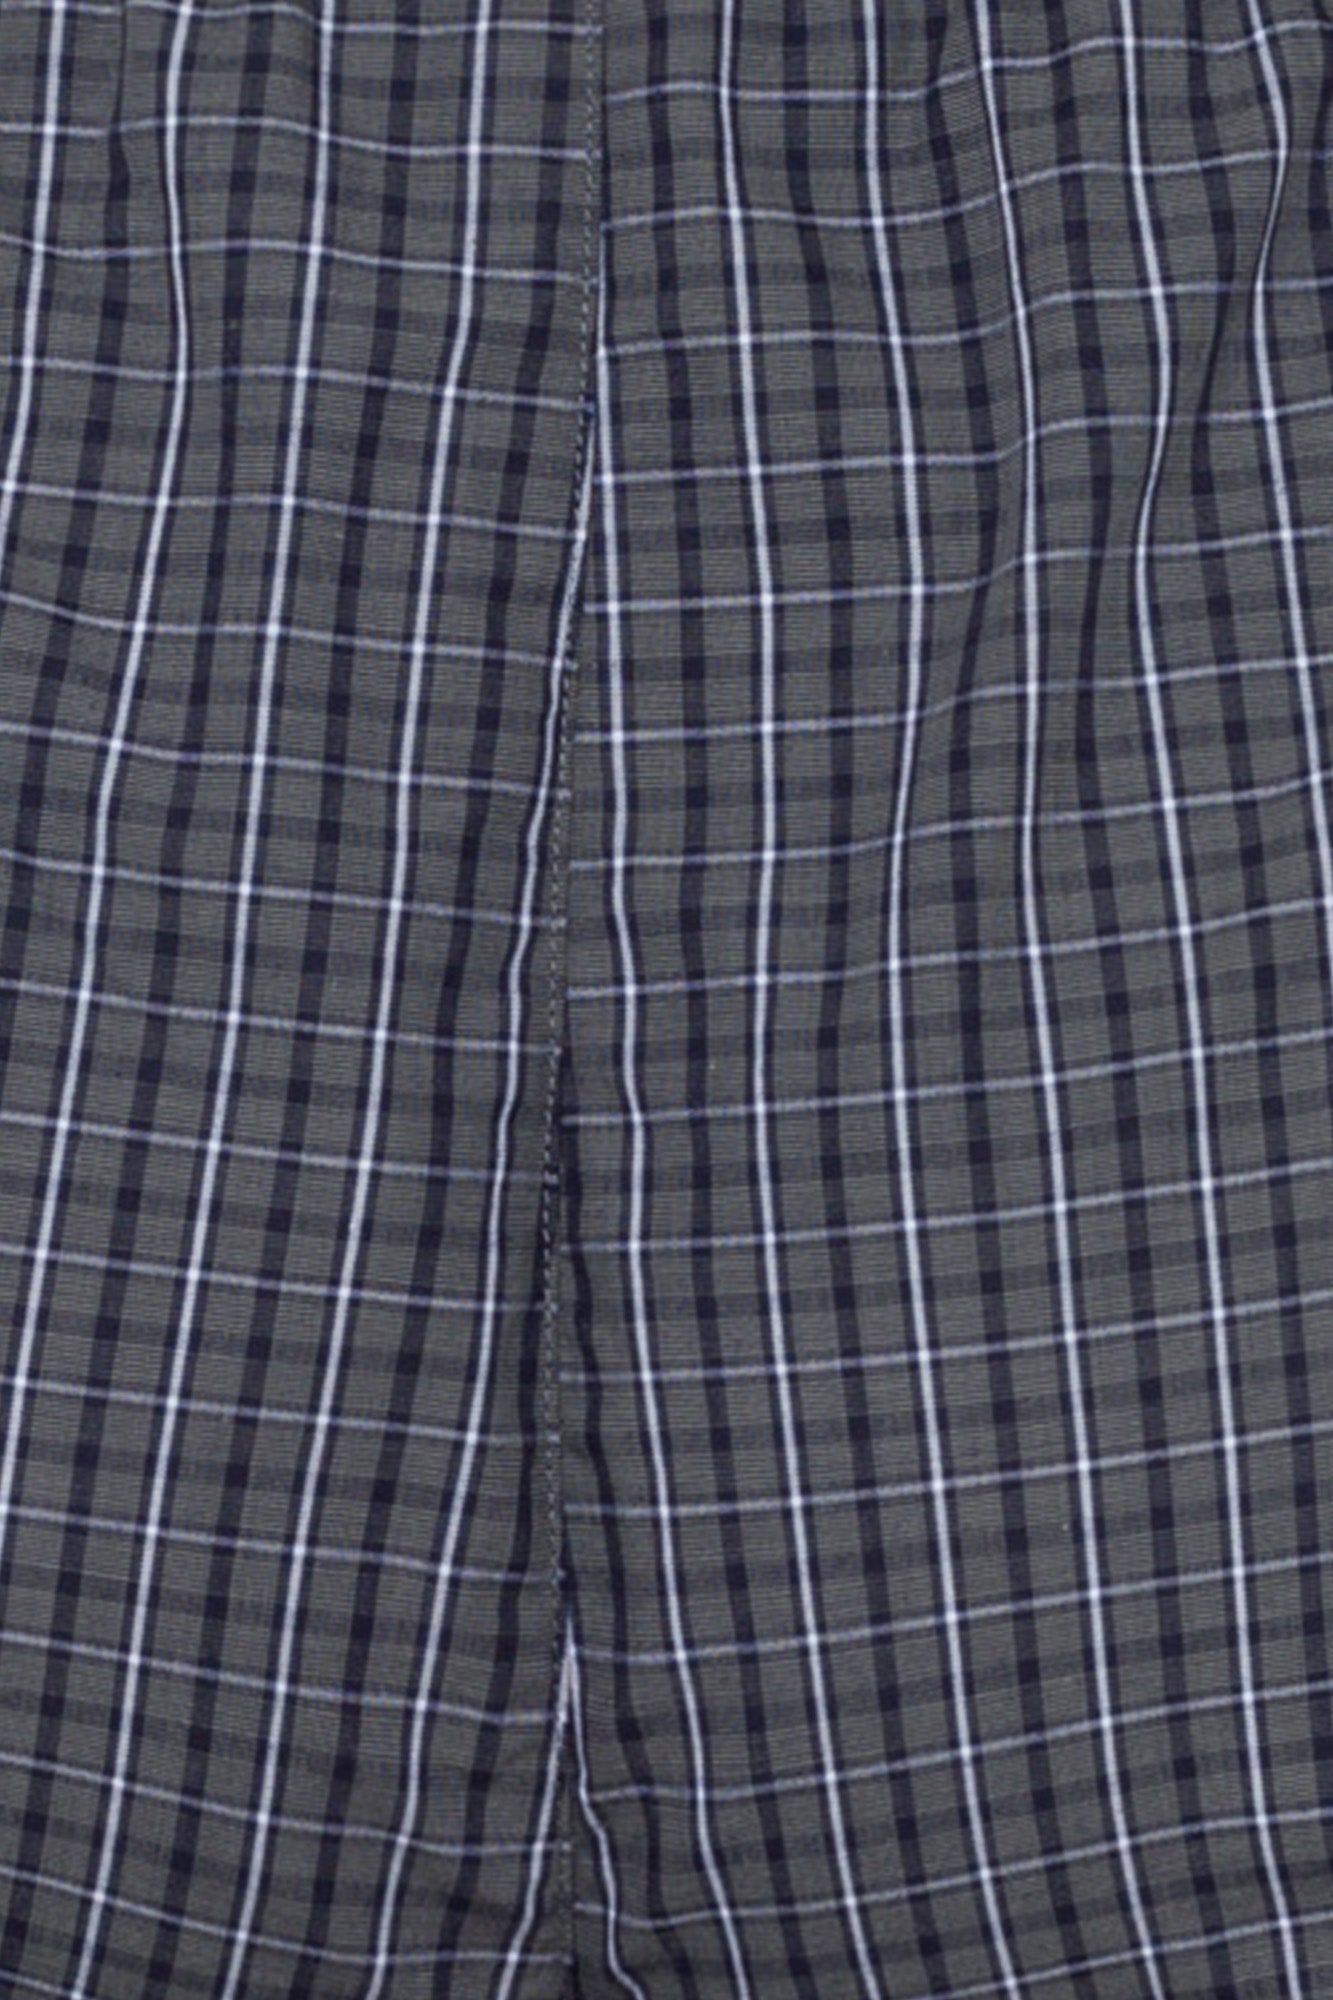 The Fancy Woven Boxers By HANRO In Casual Check